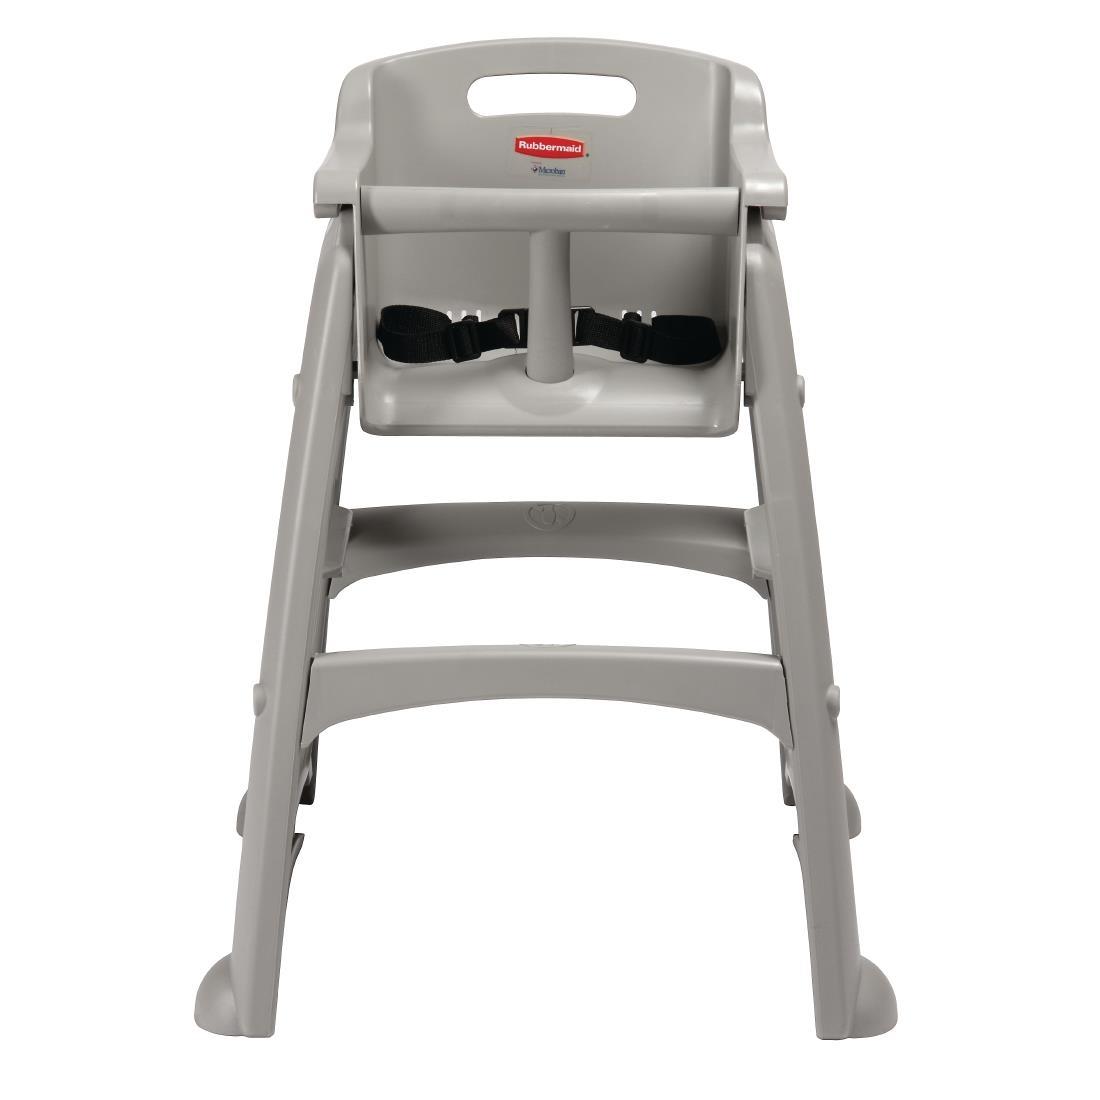 Rubbermaid Sturdy Stacking High Chair Platinum - M959  - 2